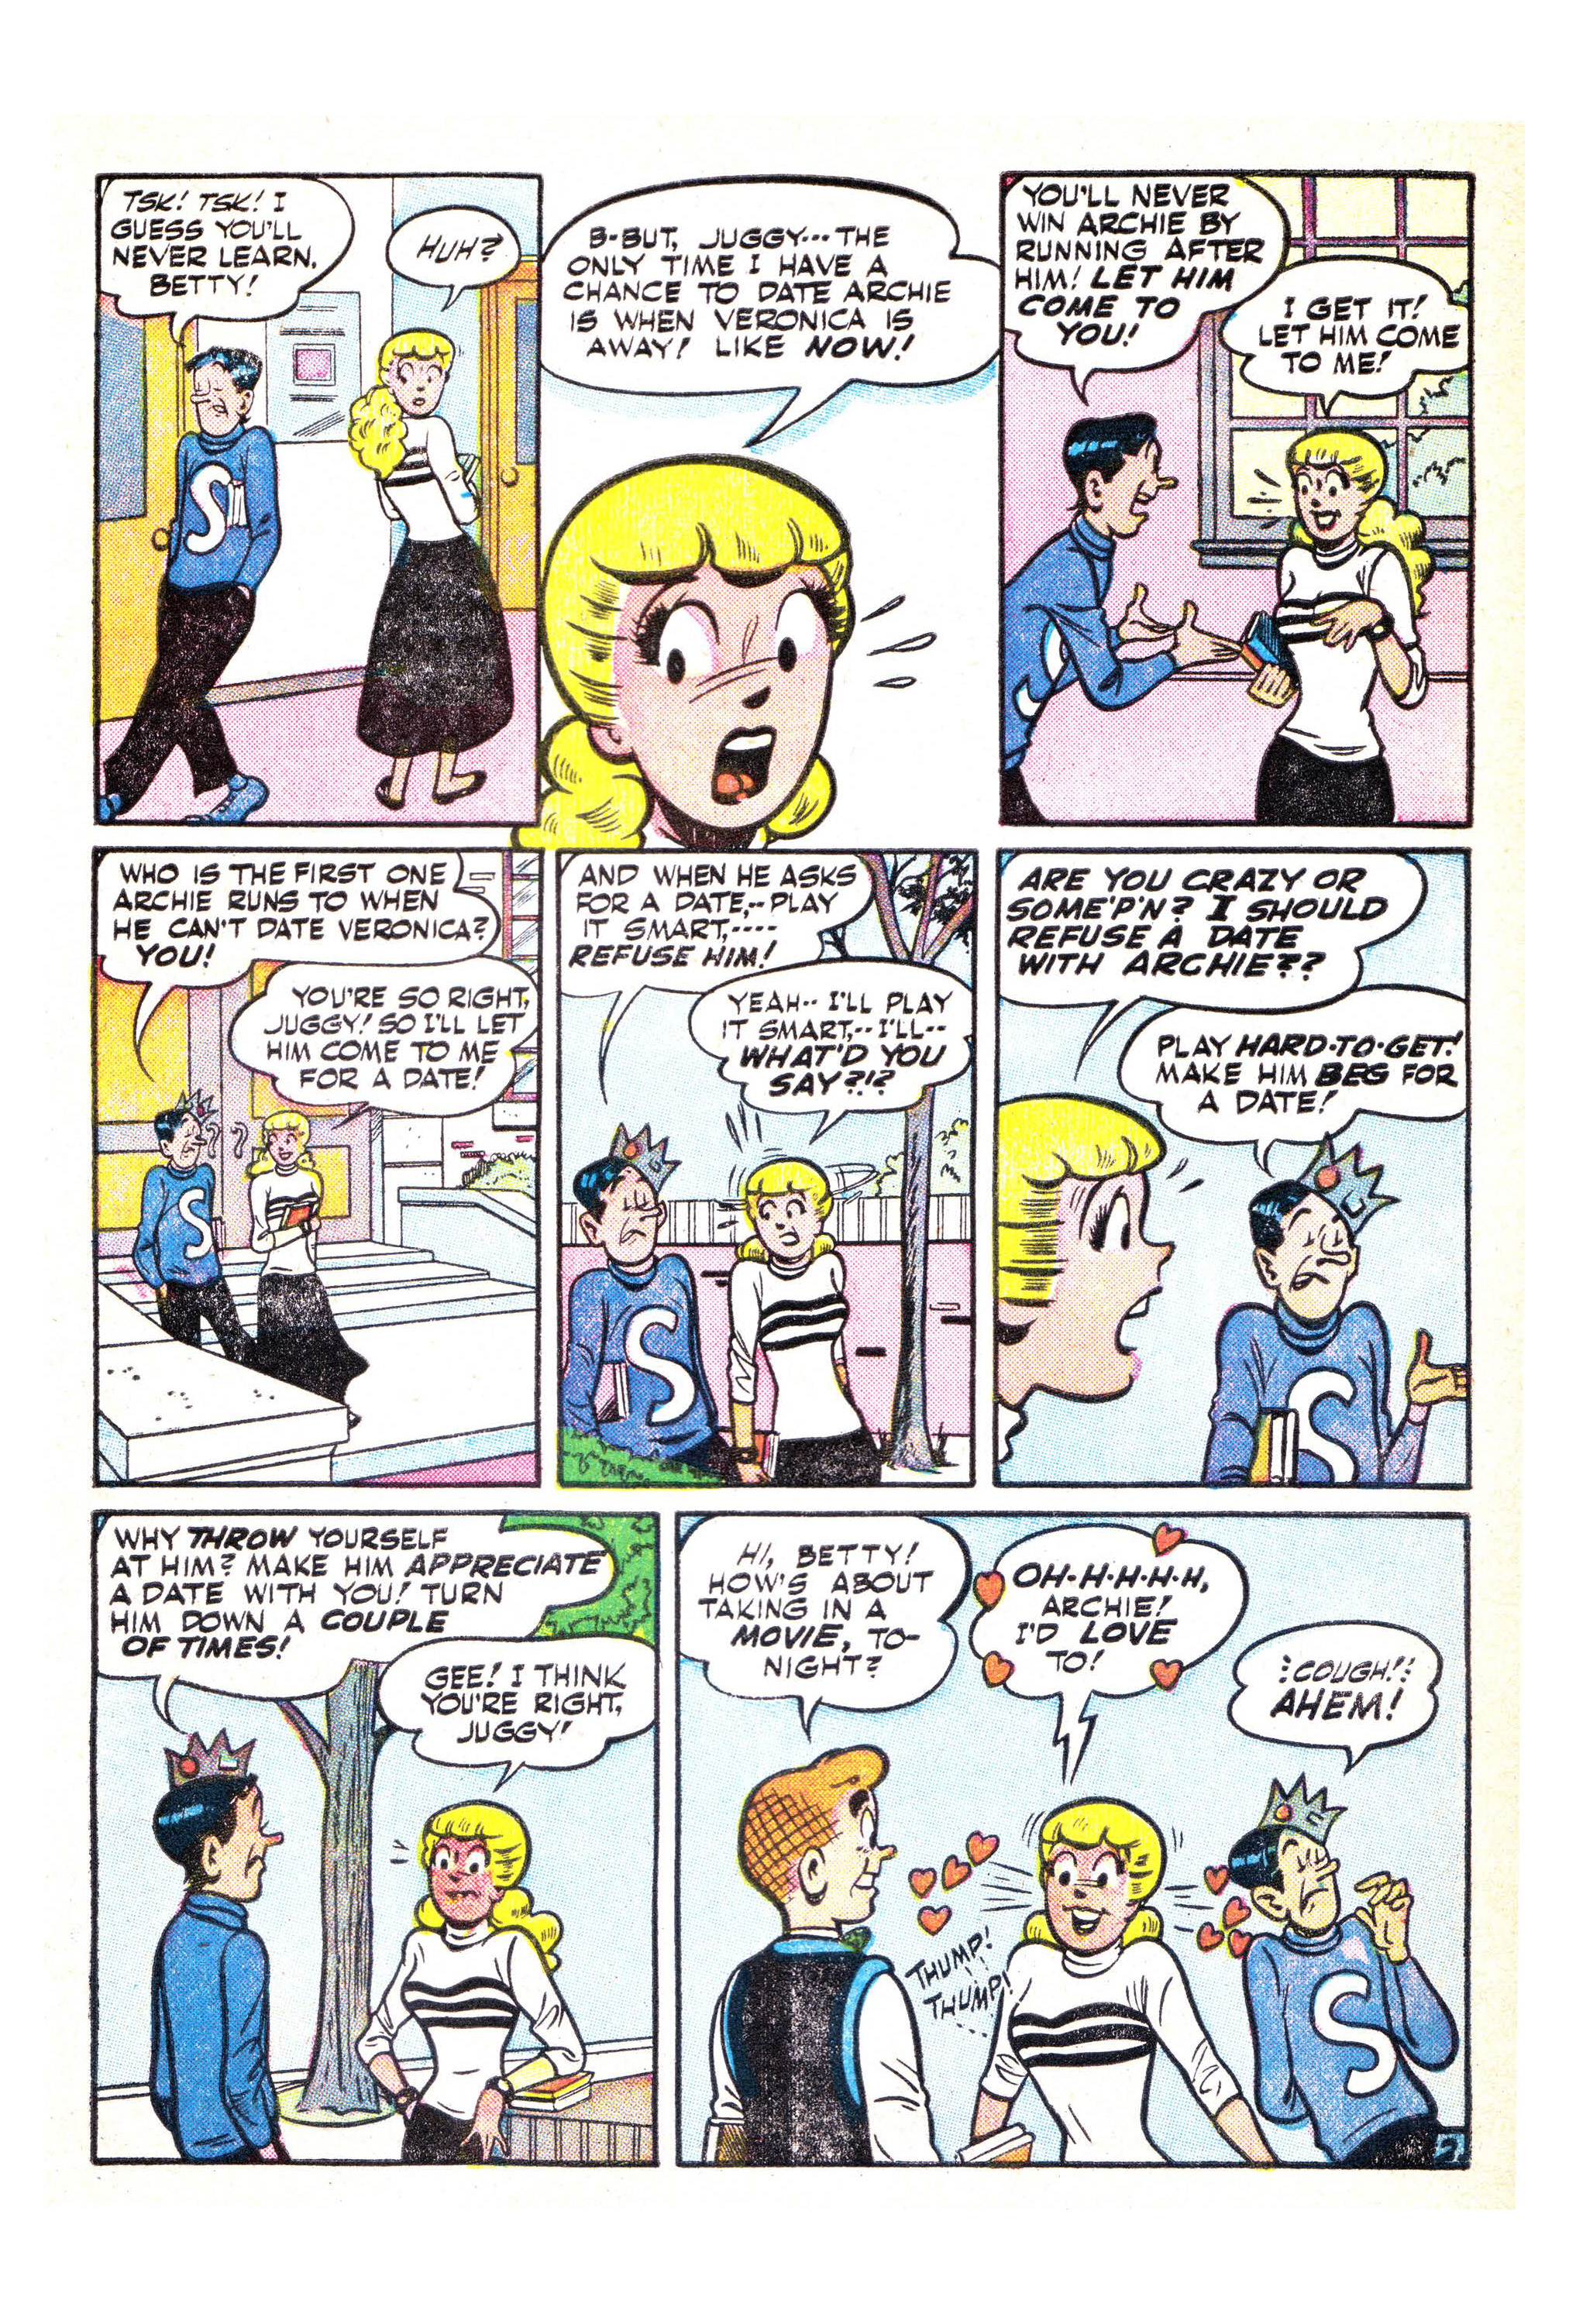 Read online Archie's Girls Betty and Veronica comic -  Issue #18 - 8